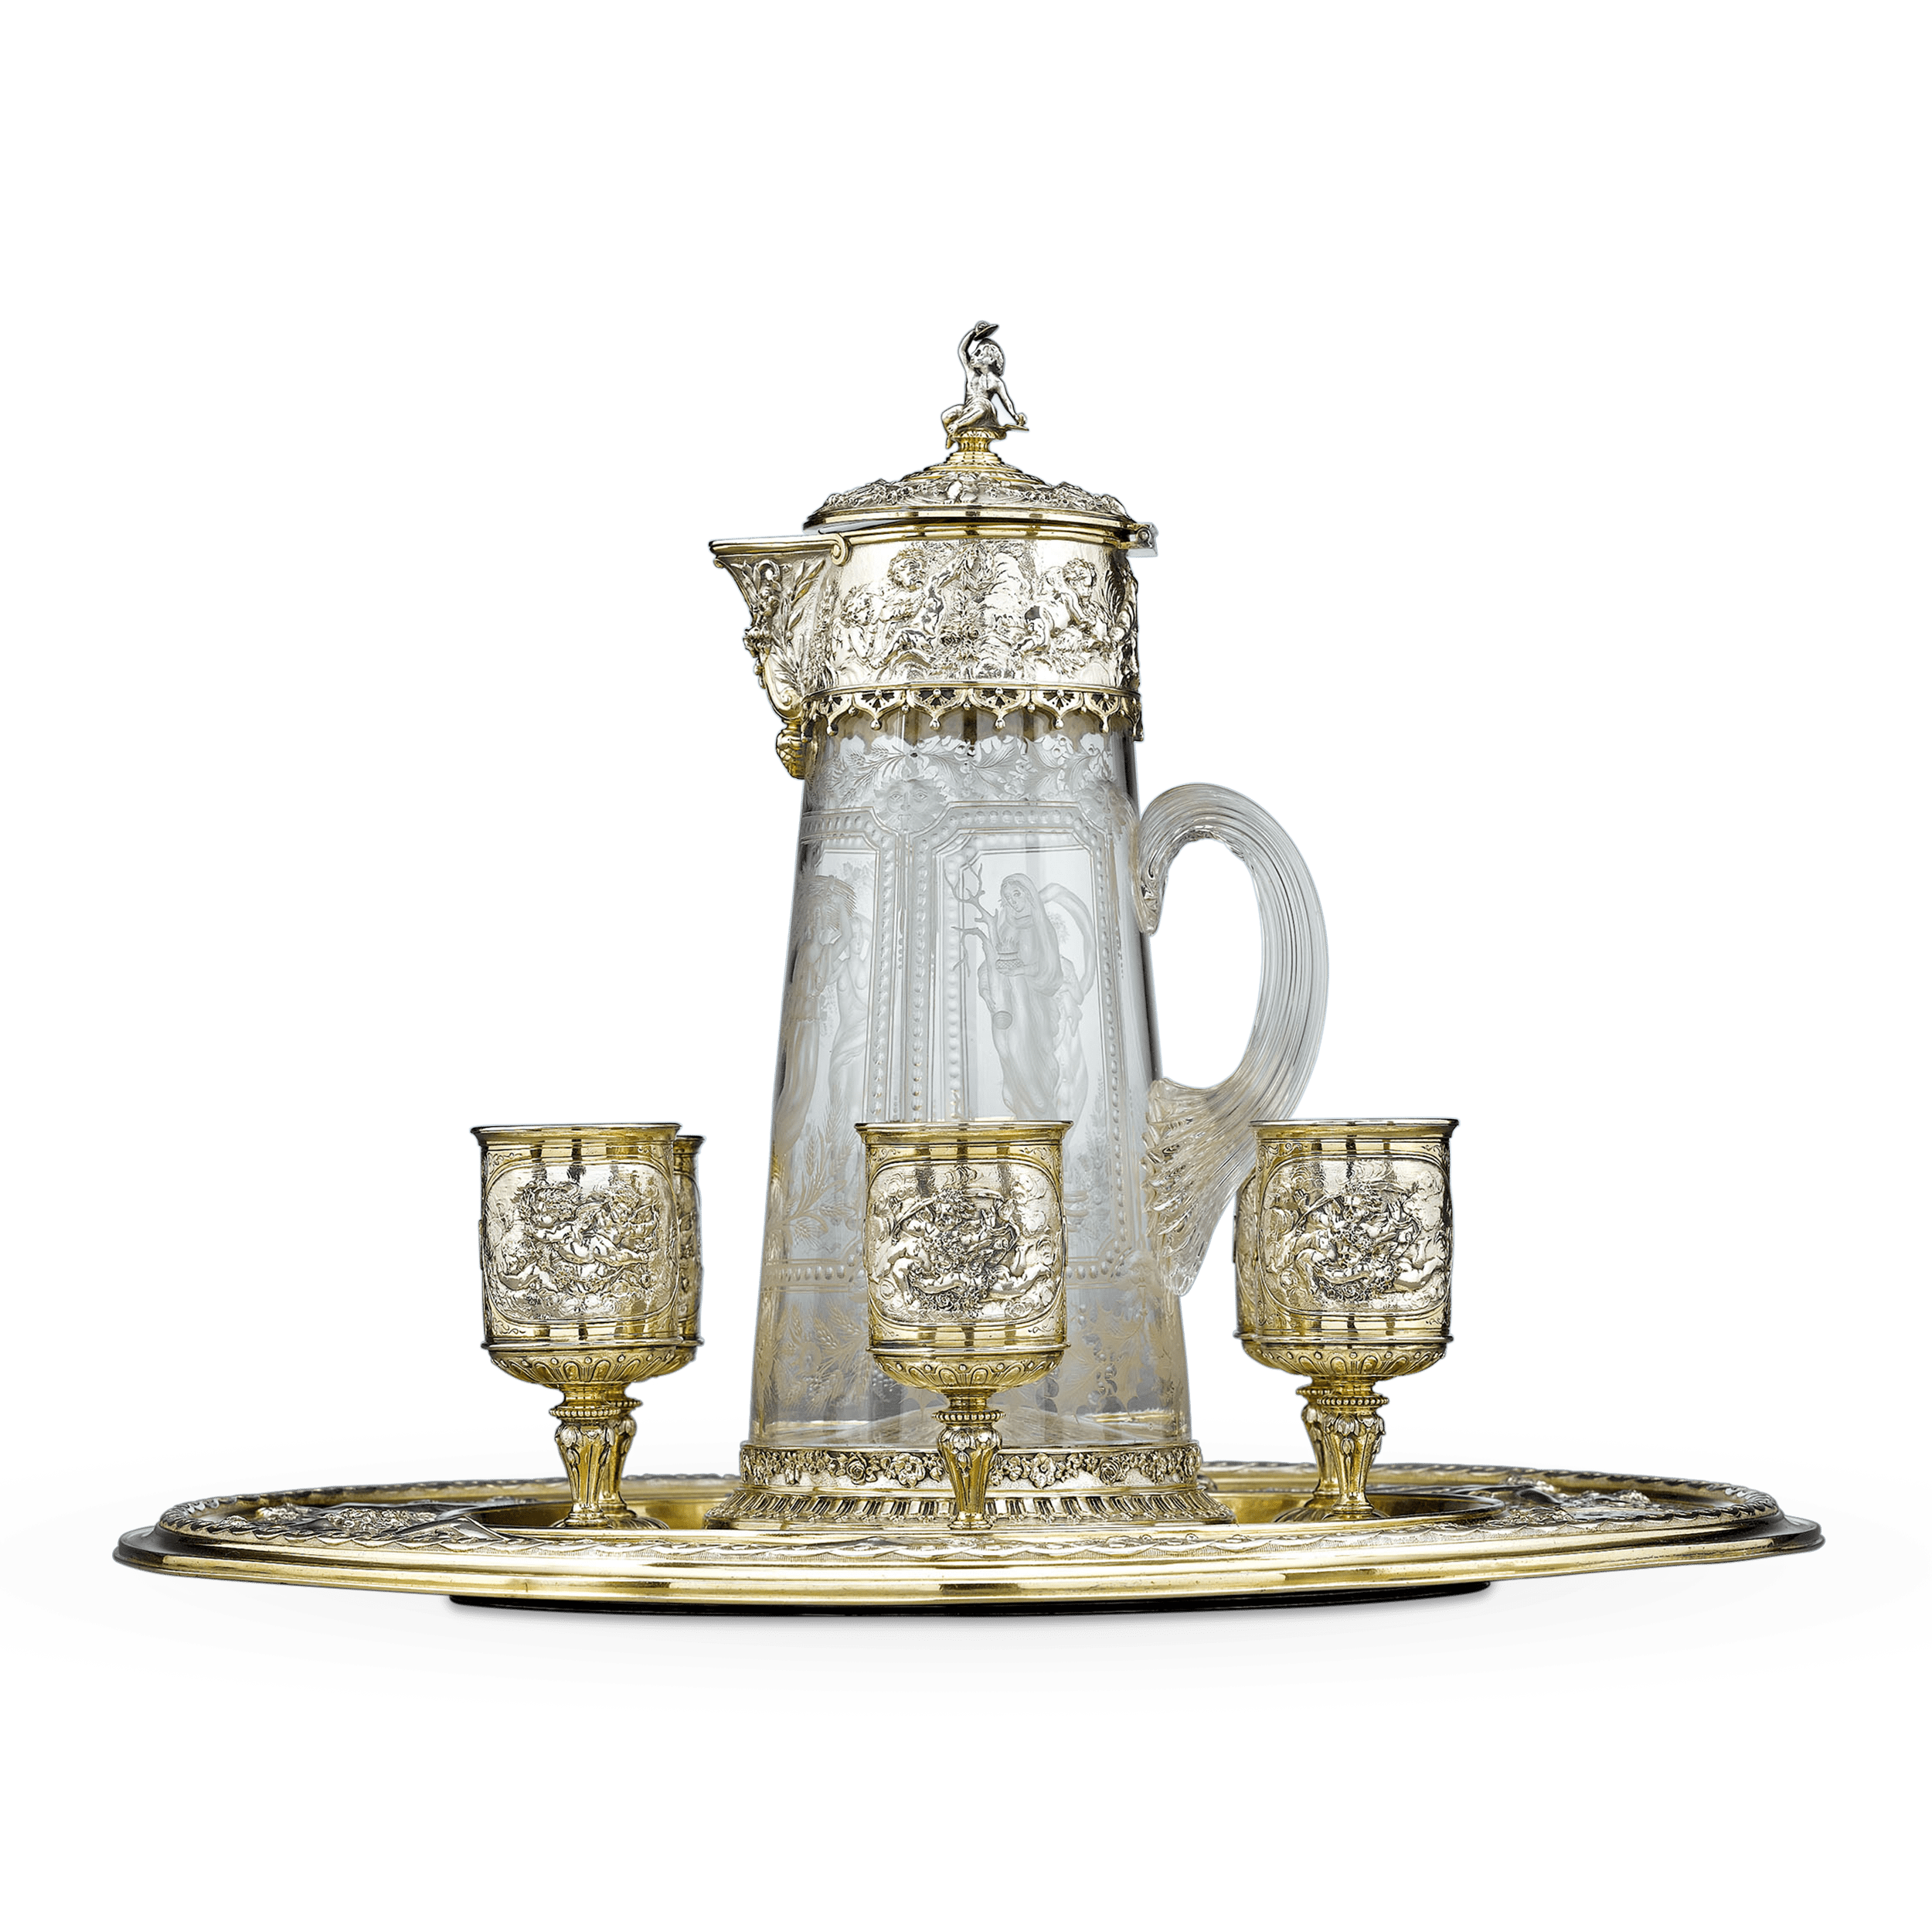 This outstanding eight-piece beverage service was crafted by the preeminent Elkington & Co.